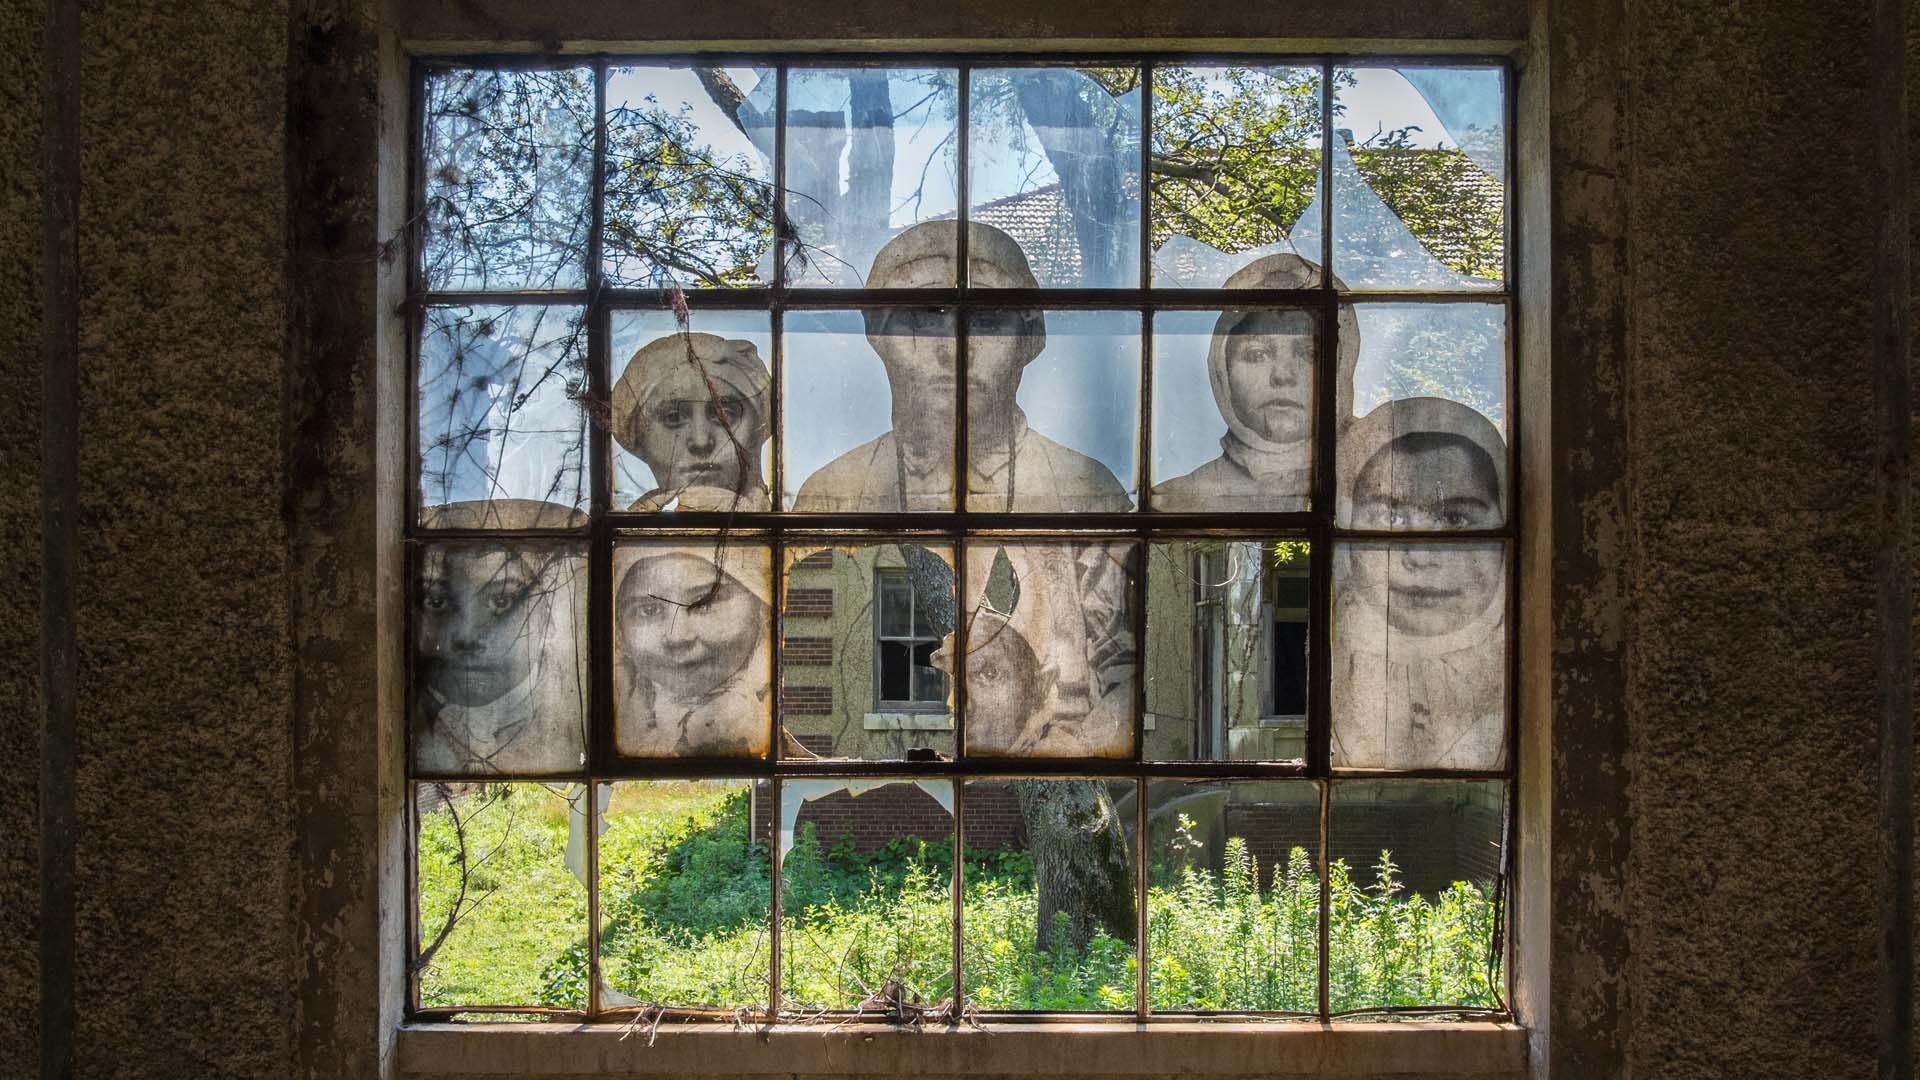 A window in the Ellis Island Immigrant Hospital, closed since 1930, displaying an early 20th century photograph.